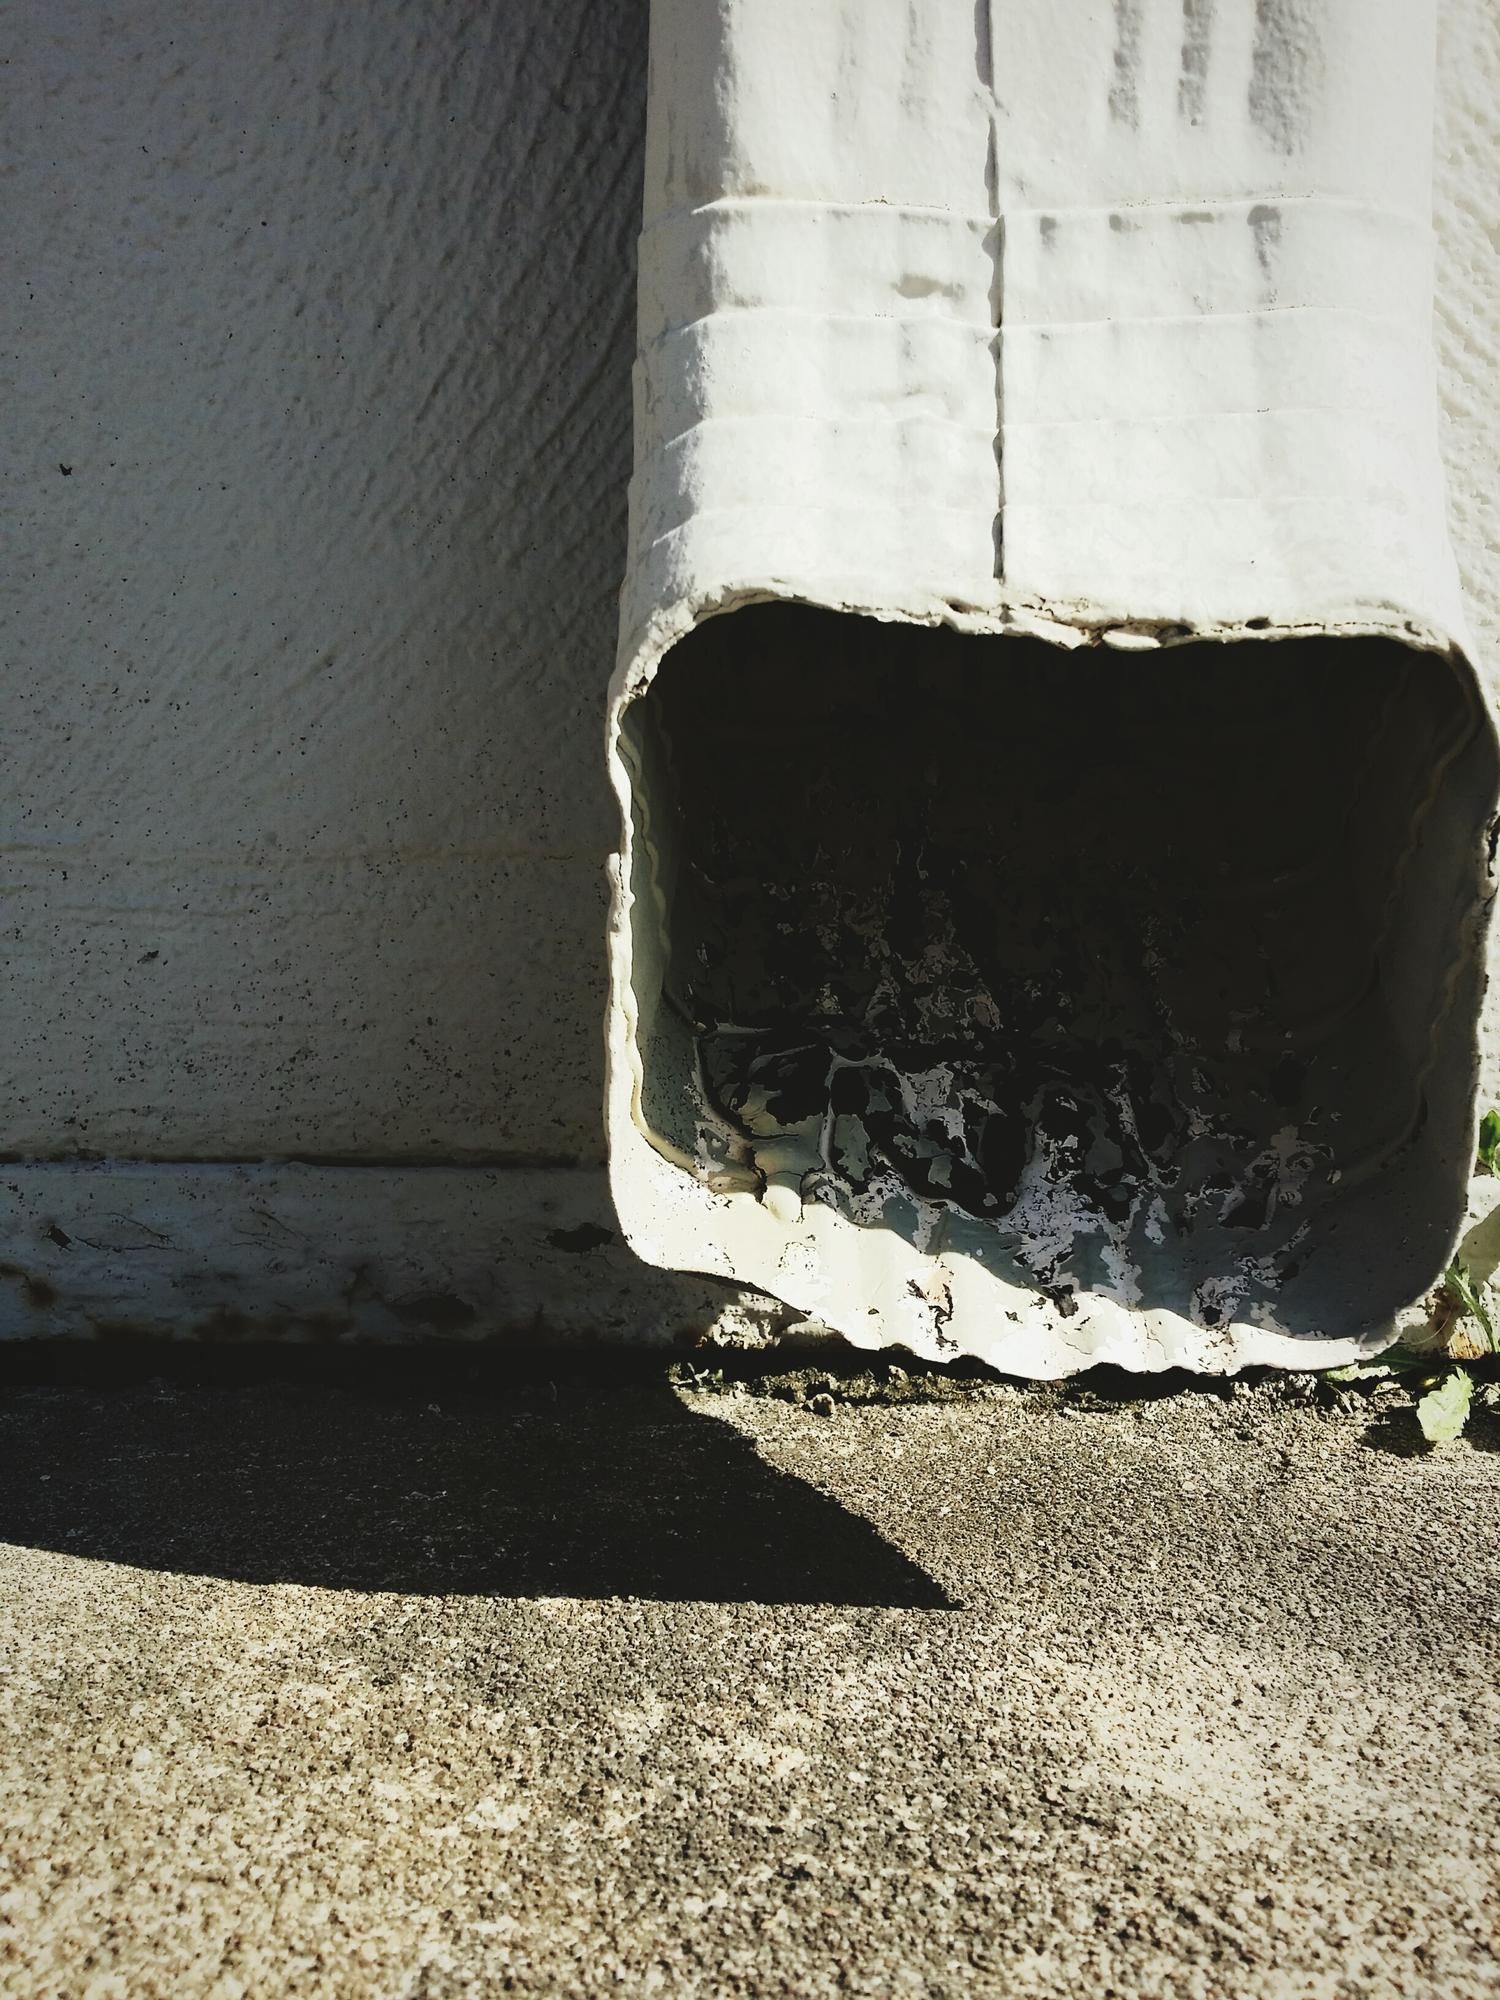 A drainpipe is sitting on the ground next to a wall